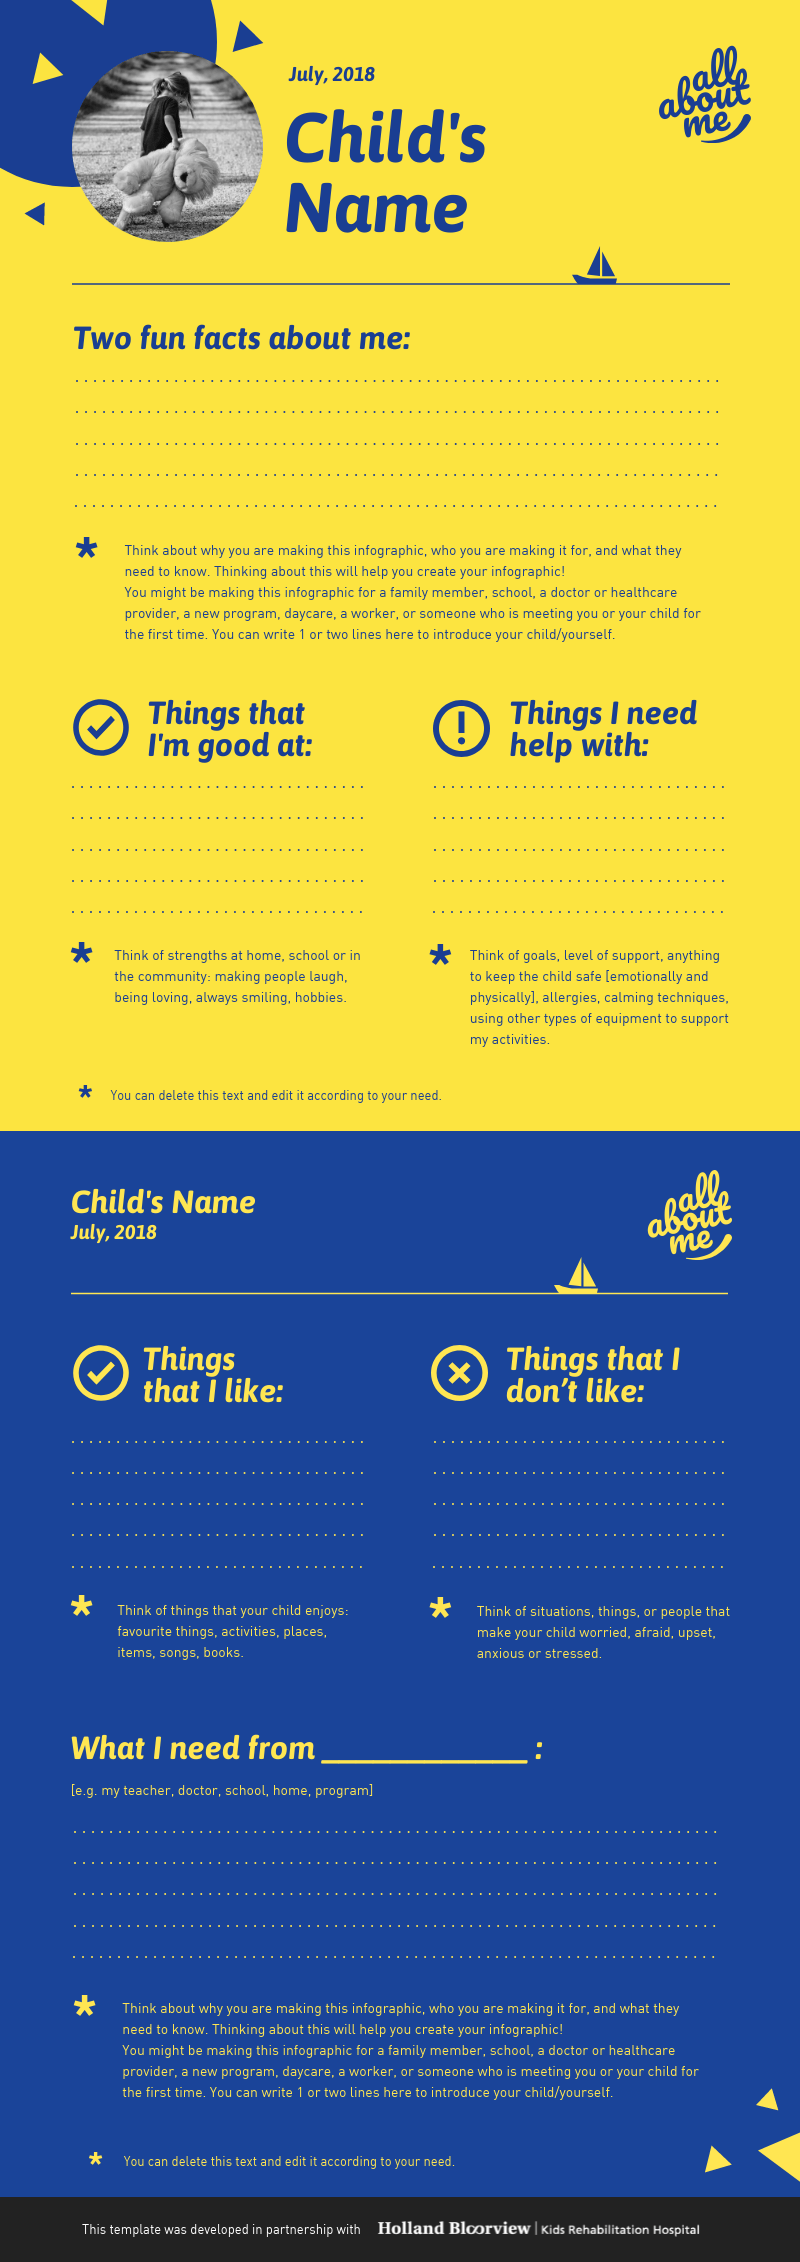 all-about-me-infographic-template-5170981